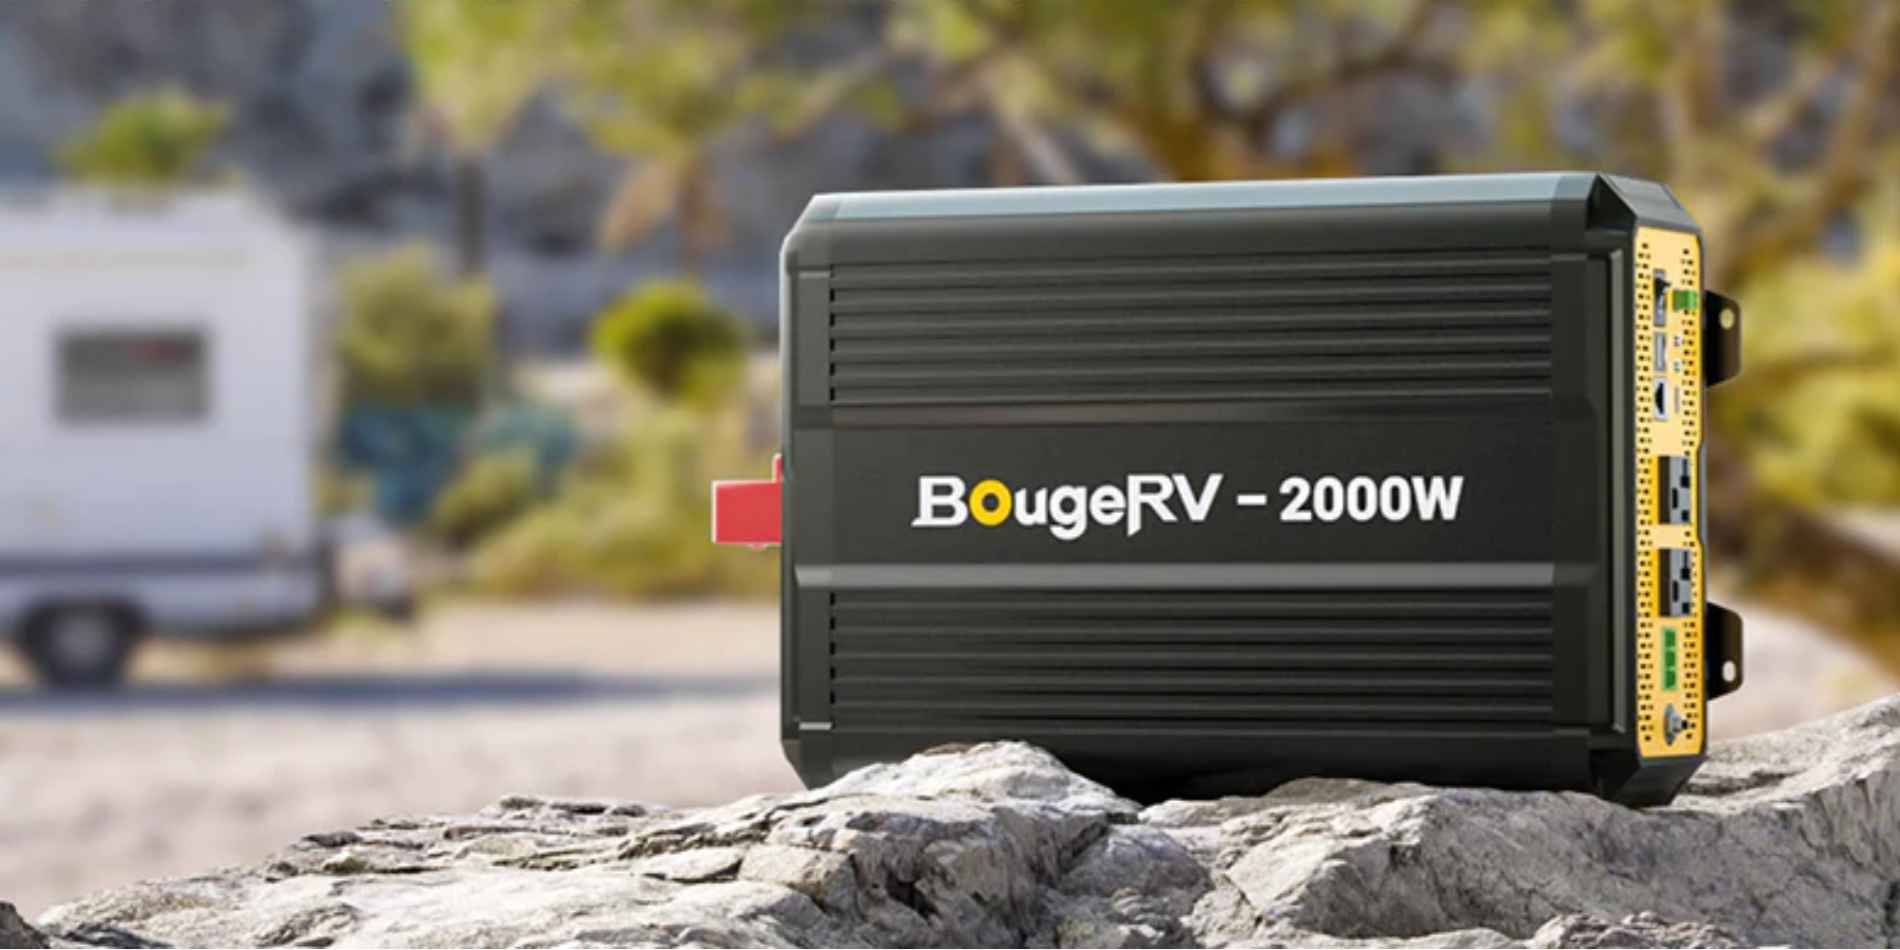 BougeRV’s 2000W pure sine wave solar inverter for camping